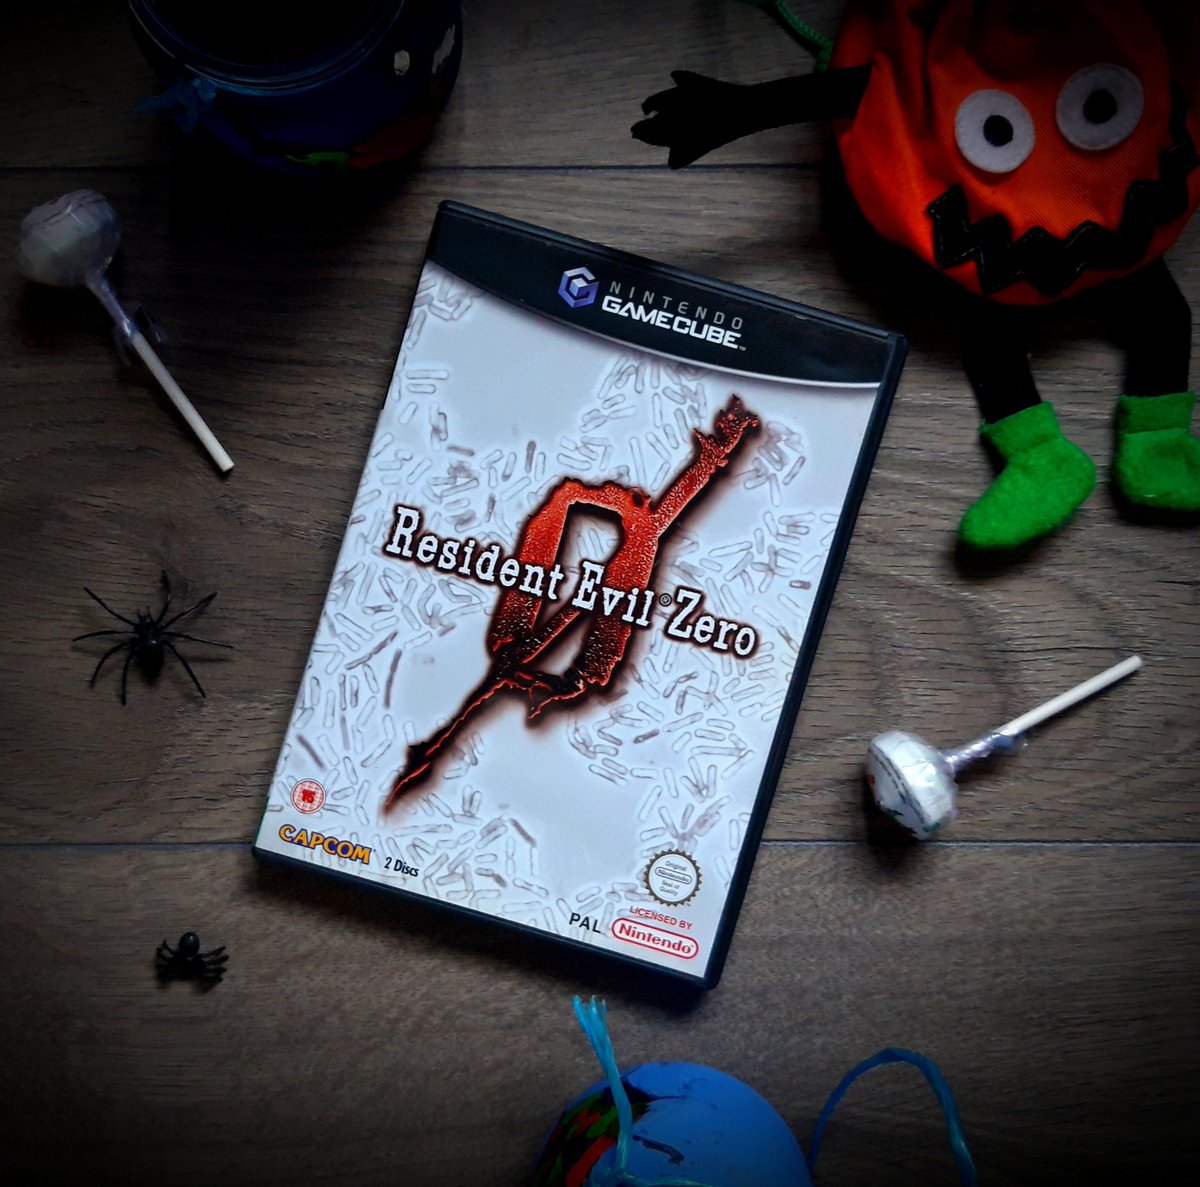 🎃 Setting the spooky mood this #Wednesday as we play #ResidentEvil zero for the #GameCube Does Zero still hold up compared to other entries in the Resident evil series? 🧟‍♂️🧟‍♀️ #GamersUnite #retrogamer #retrogames #gamer #Nintendo #RETROGAMING #Halloween2022 #RETROctober #Retro